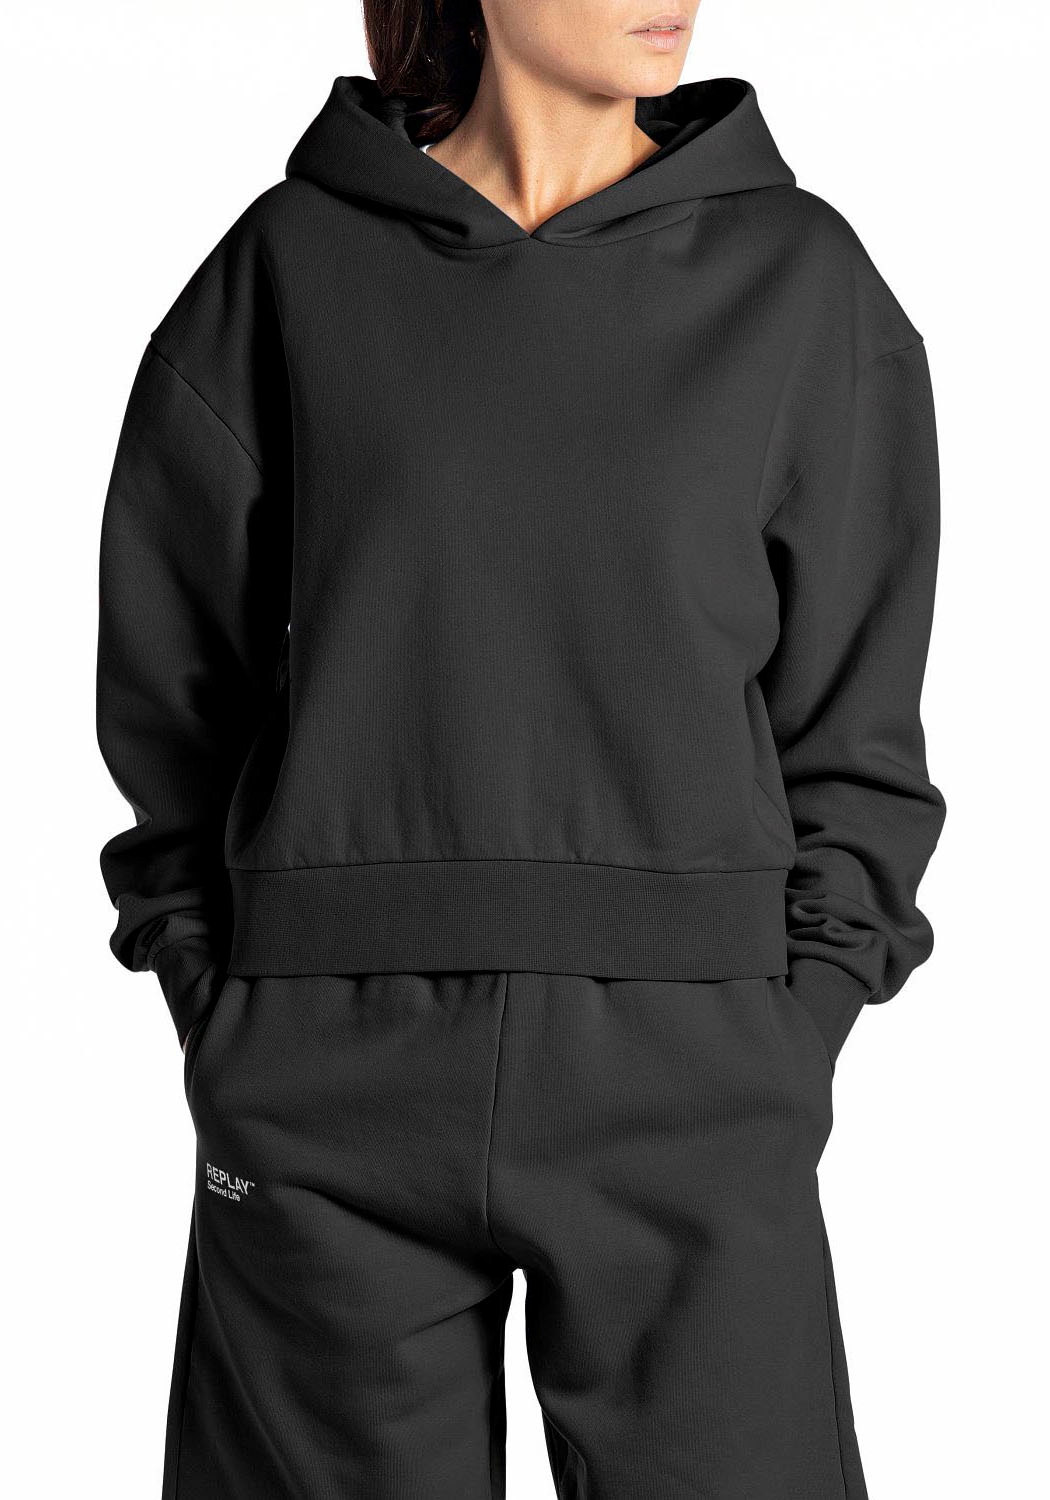 Replay Hoodie, Second Life